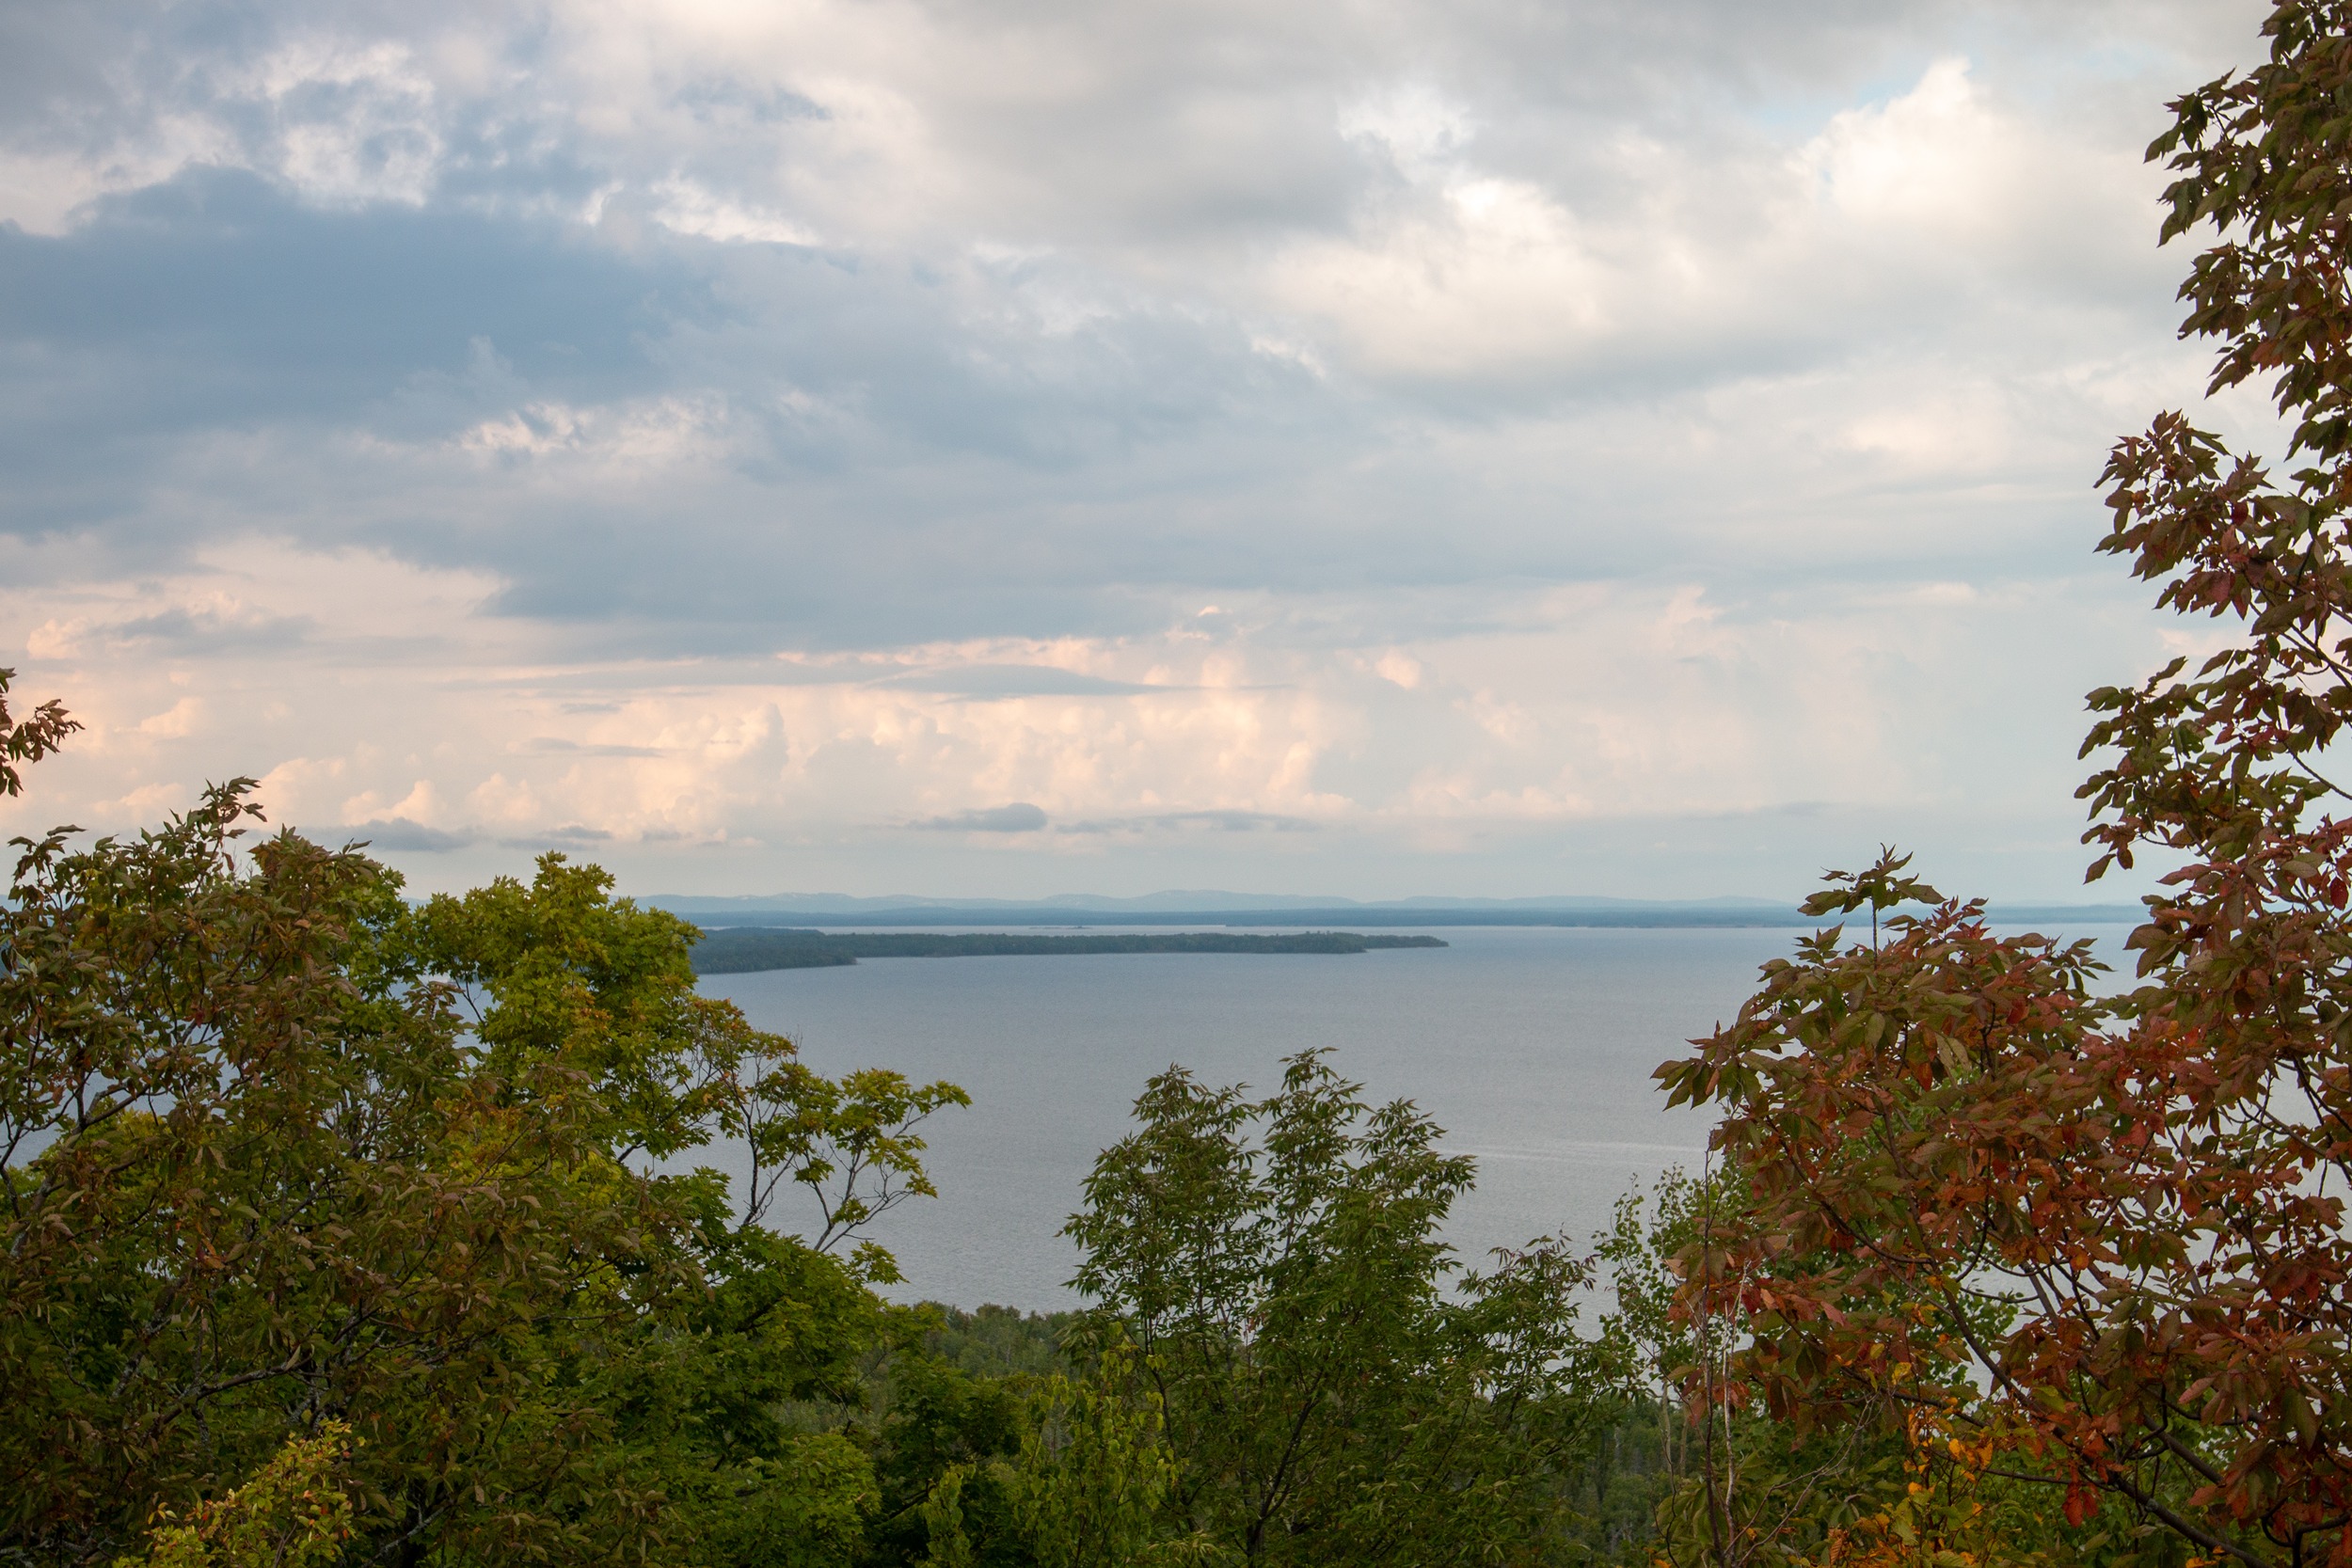 Trees with leaves starting to turn in front of a vista overlooking water and islands